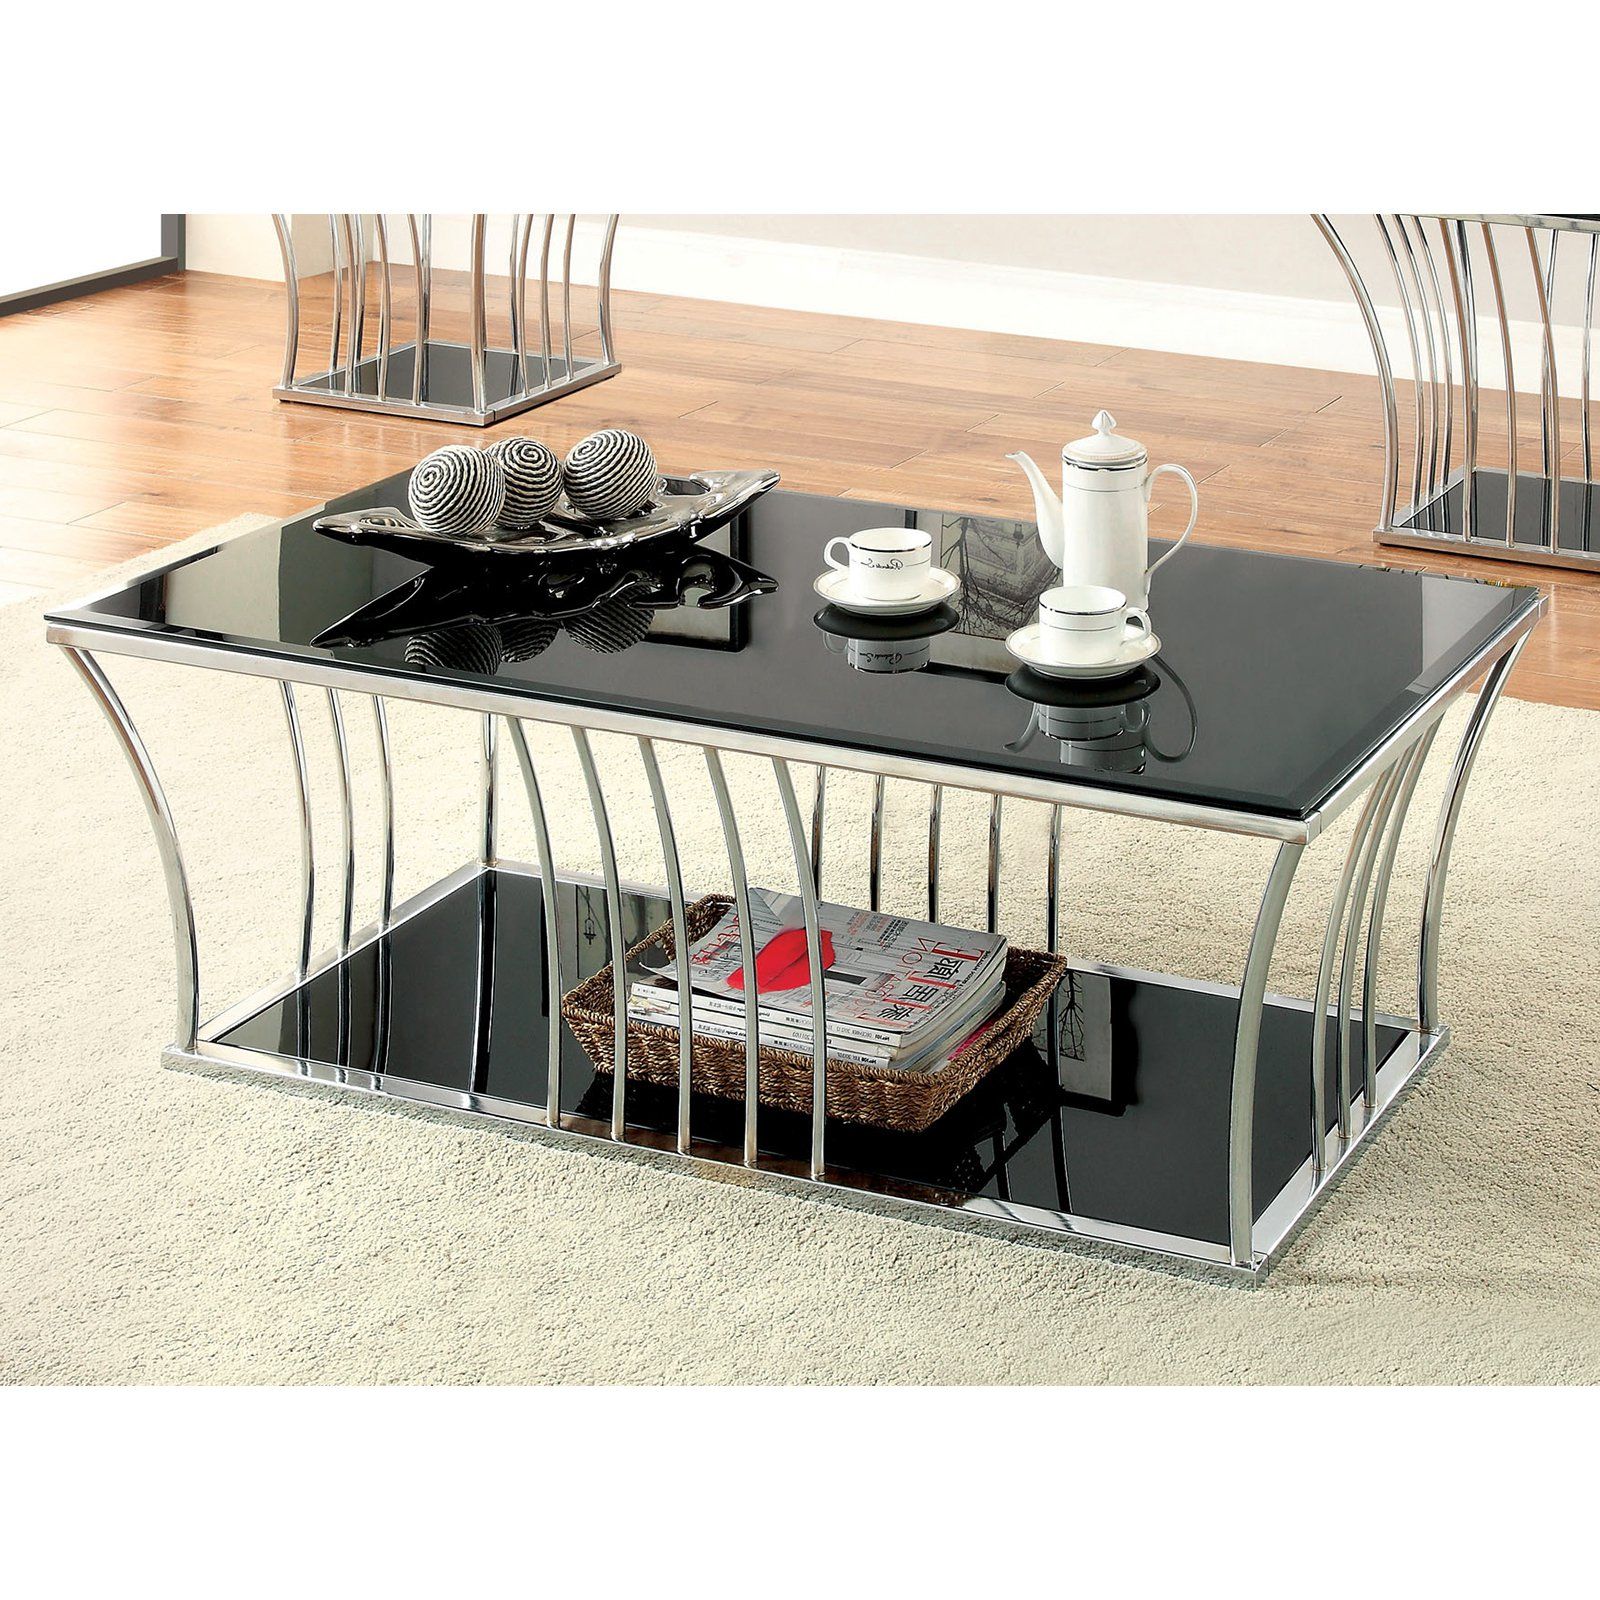 Chrome Coffee Tables In Preferred Furniture Of America Arsoli Beveled Glass Top Coffee Table – Chrome (View 2 of 10)